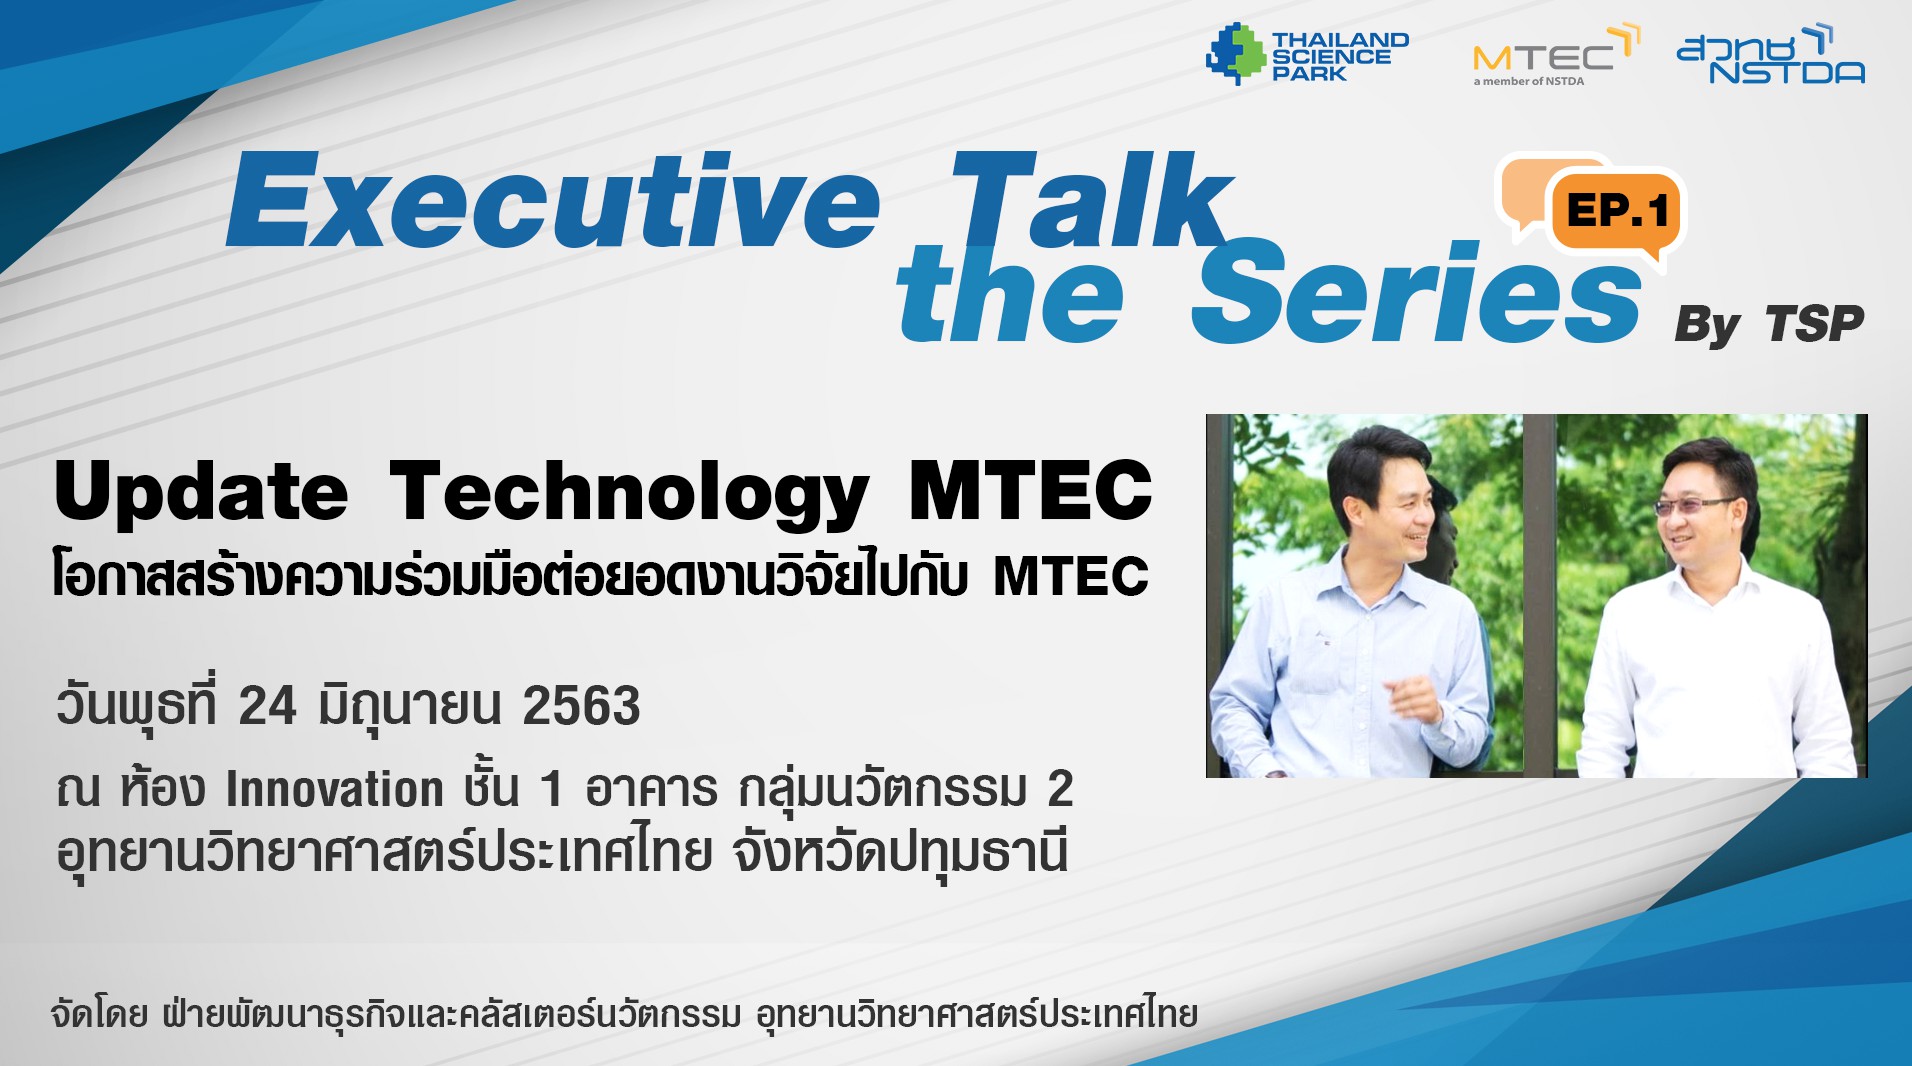 Executive Talk The Series EP.1 -Update Technology MTEC-